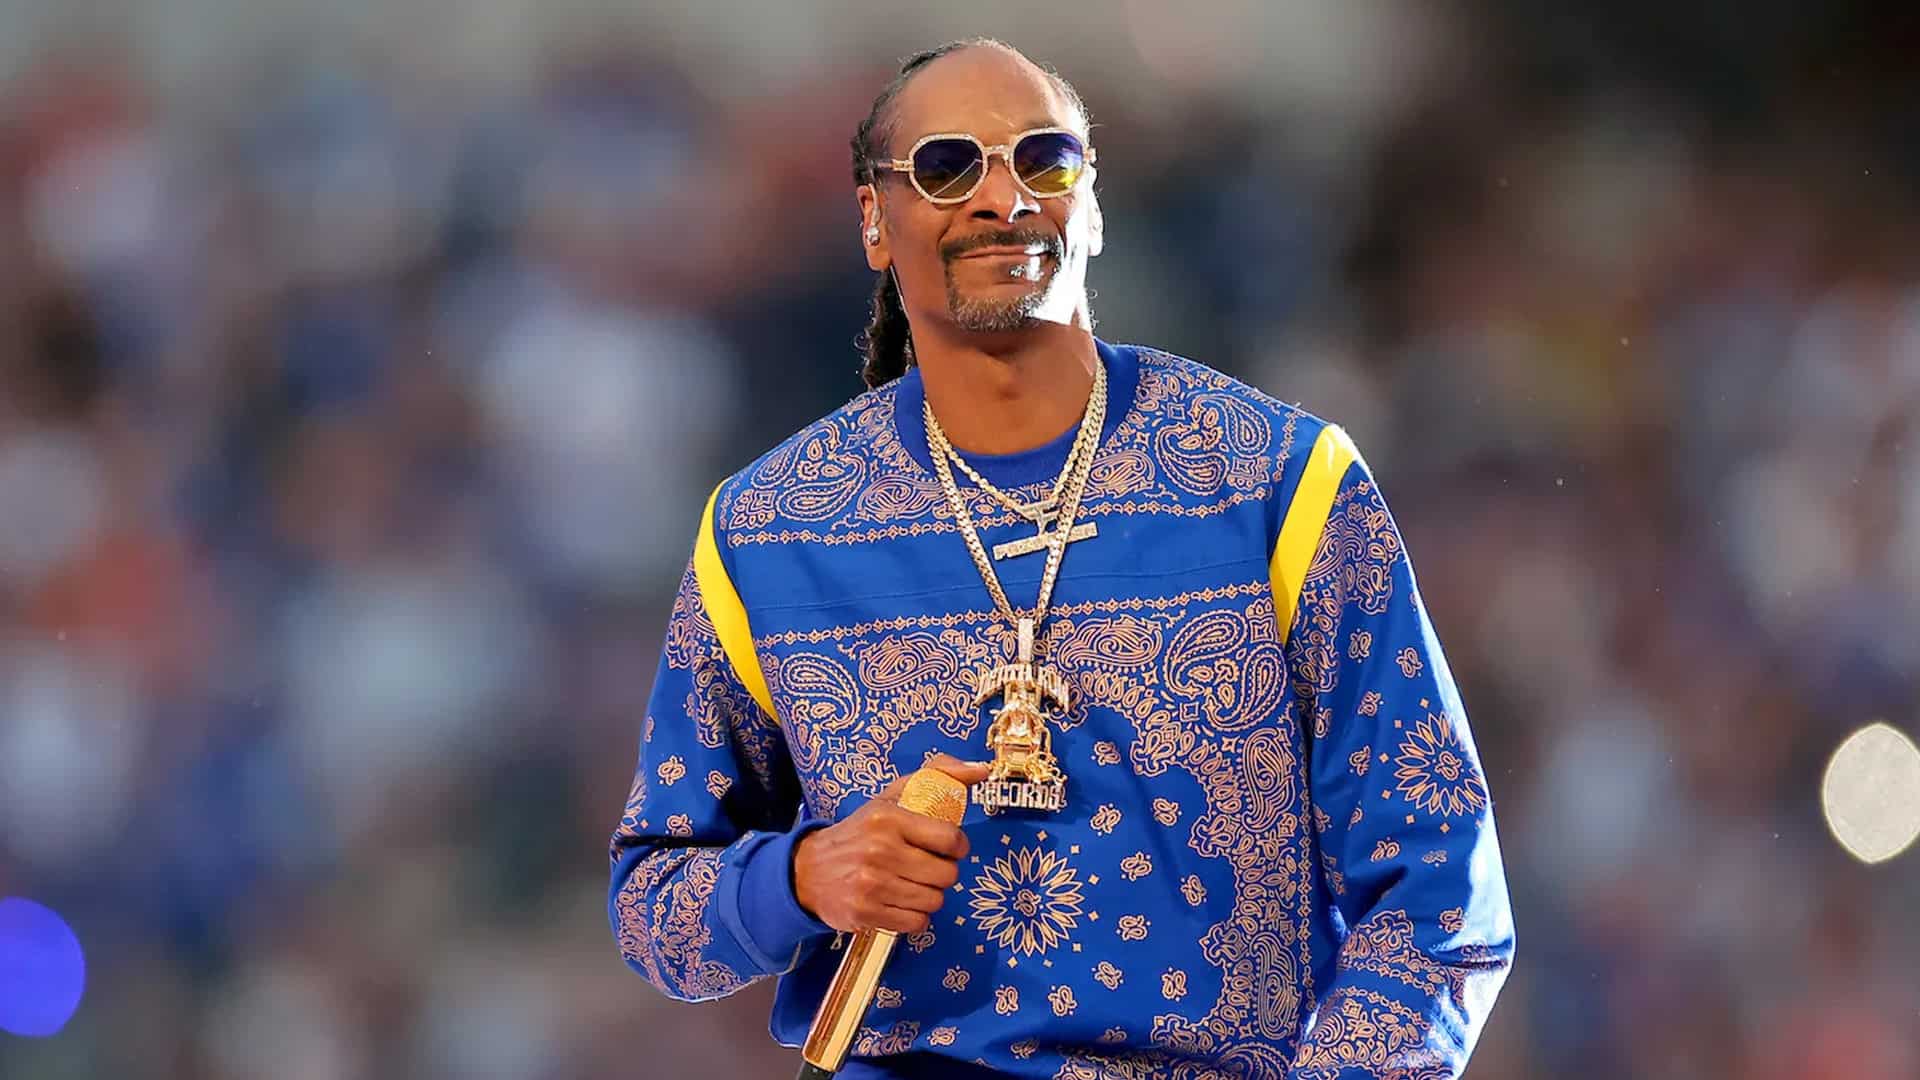 Snoop Dogg Makes Death Row Records an NFT Label